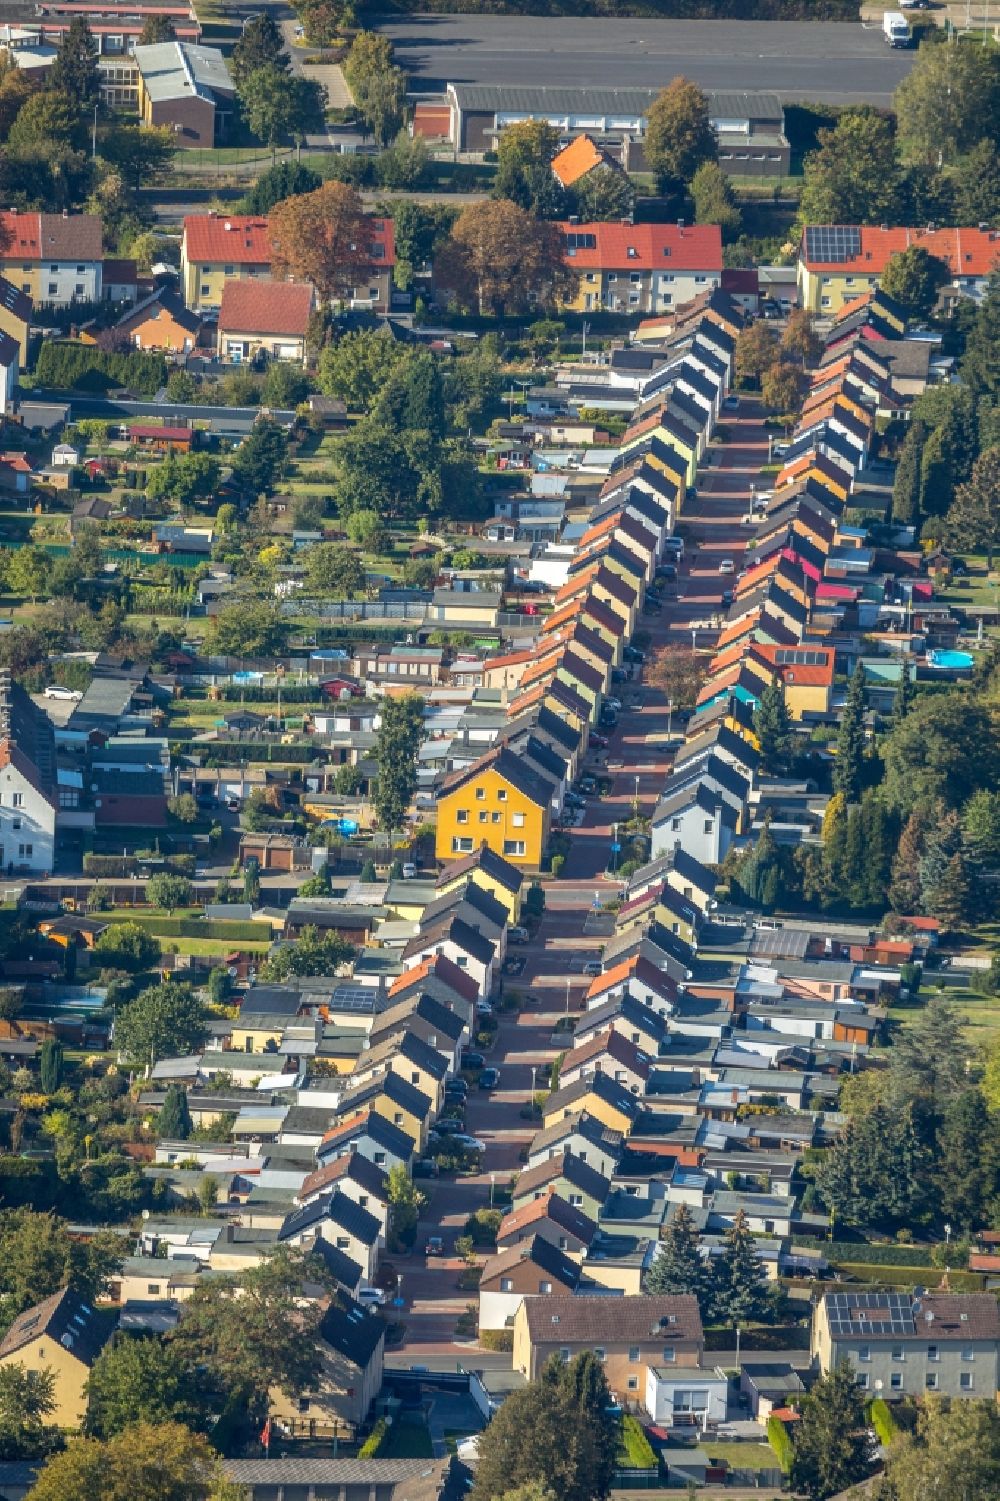 Aerial photograph Unna - Residential area of a single-family house settlement, historical colliery settlement on Friedrichstrasse in Unna, North Rhine-Westphalia, Germany